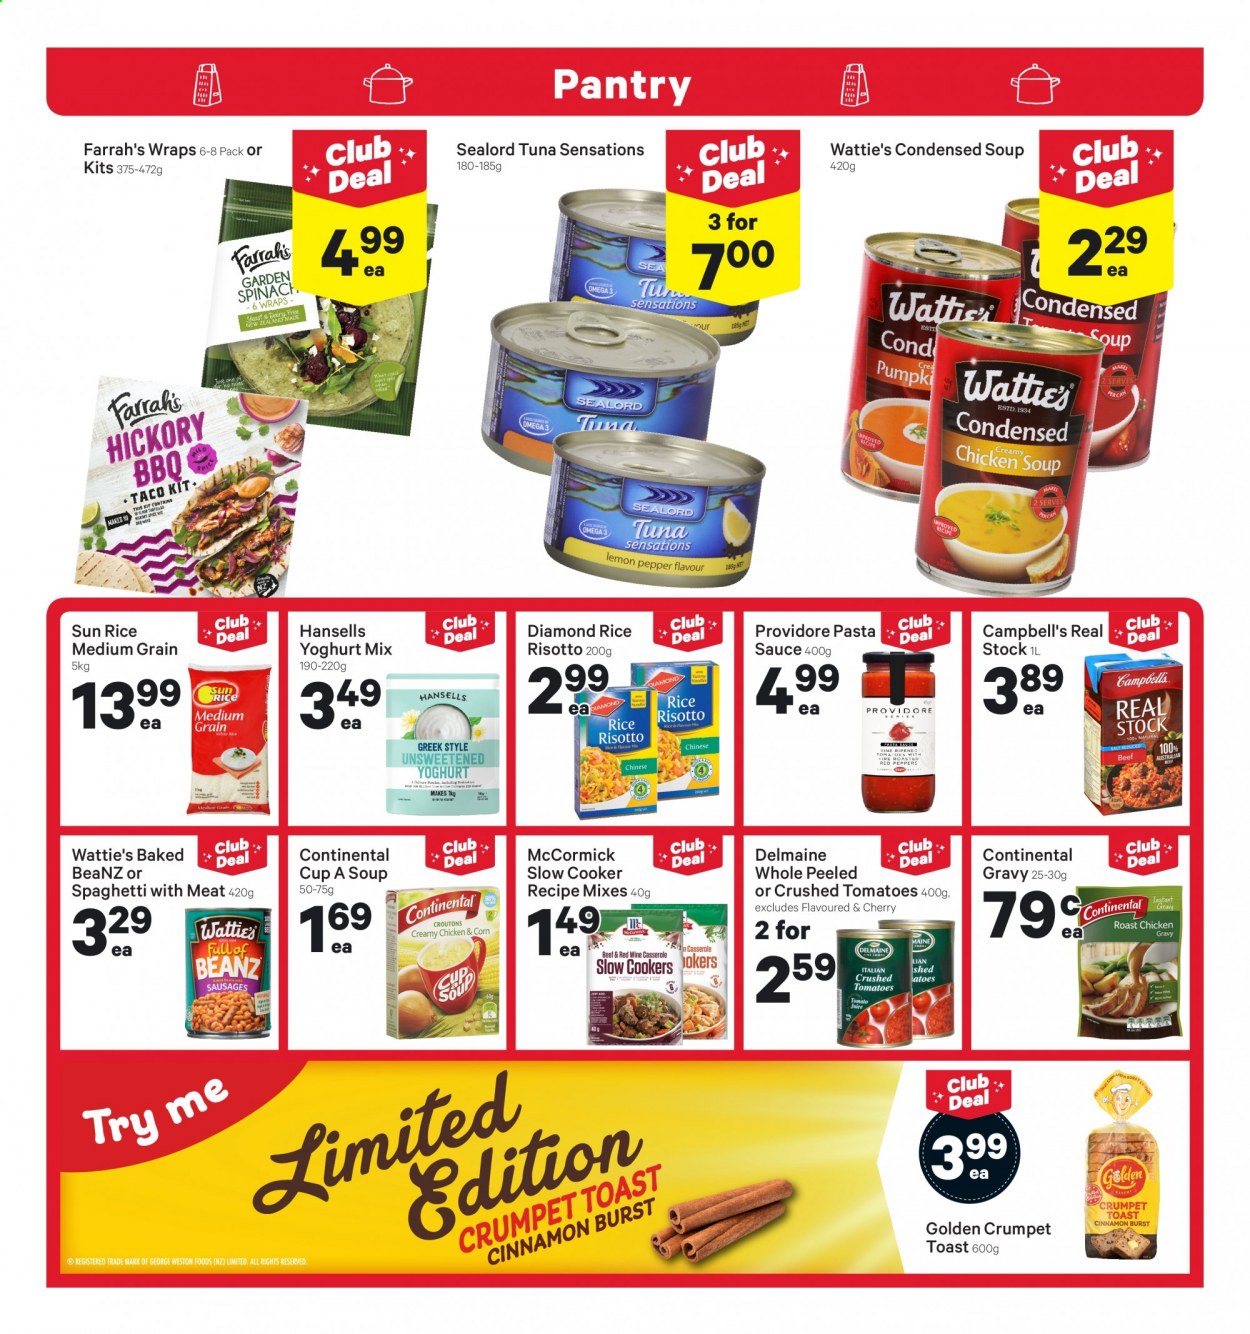 thumbnail - New World mailer - 21.06.2021 - 27.06.2021 - Sales products - wraps, Golden Crumpet, corn, tomatoes, red peppers, cherries, tuna, Sealord, Campbell's, chicken roast, chicken soup, condensed soup, soup, pasta, sauce, Wattie's, Delmaine, instant soup, Continental, sausage, yoghurt, croutons, crushed tomatoes, sealord tuna, rice, cinnamon, tomato juice, juice, Omega-3. Page 12.